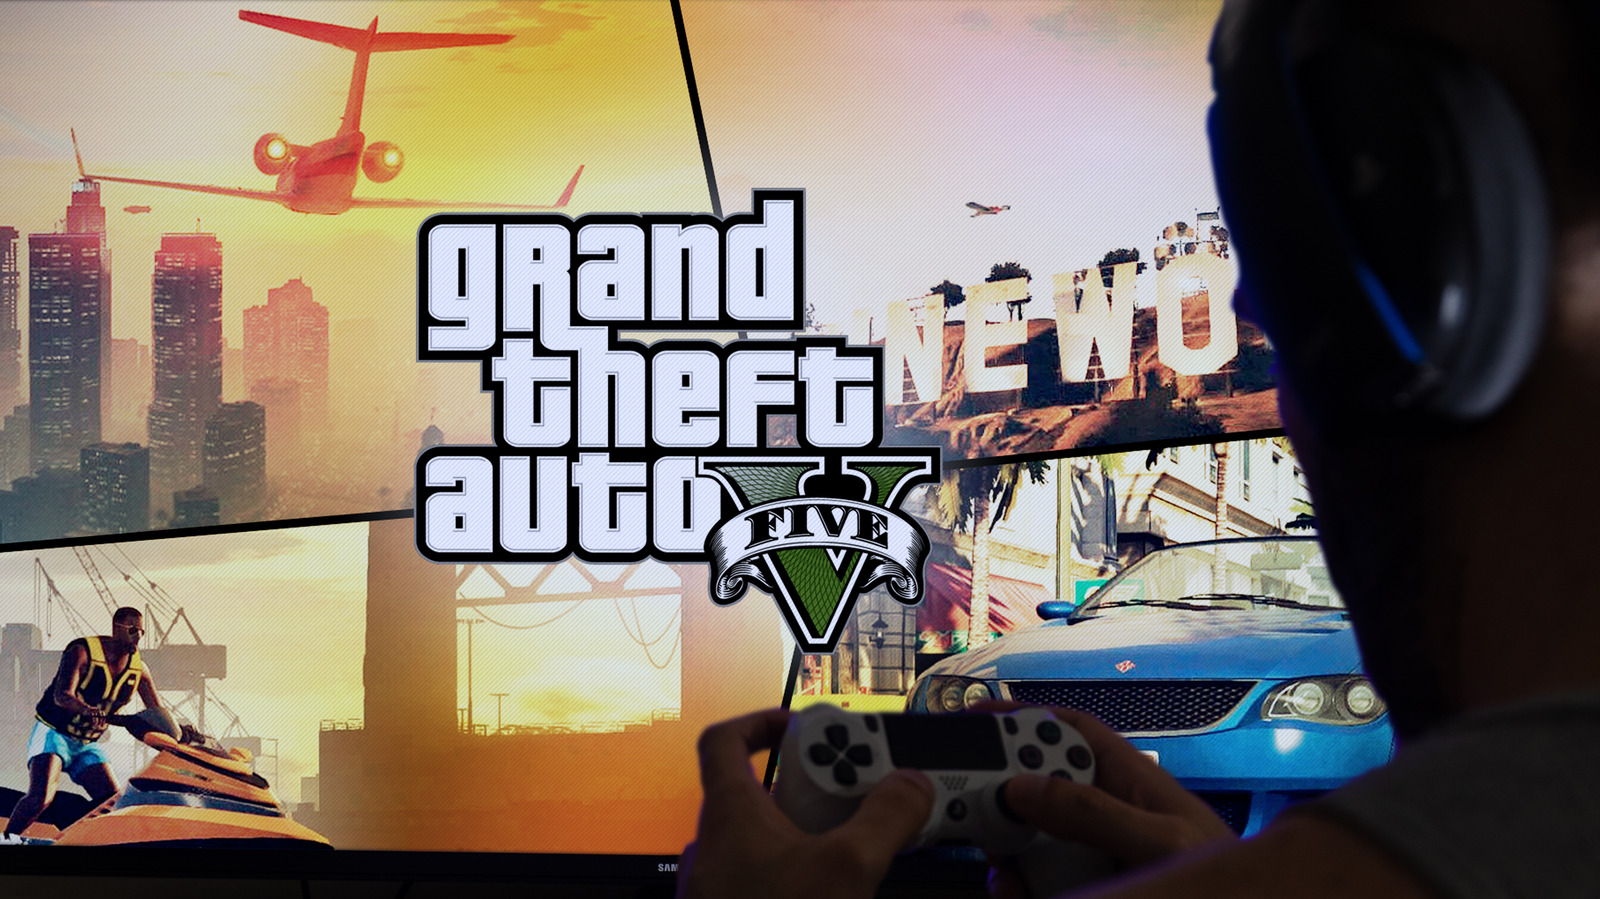 TinyRobot - Get GTA ONLINE Free on PS5* The standalone version of